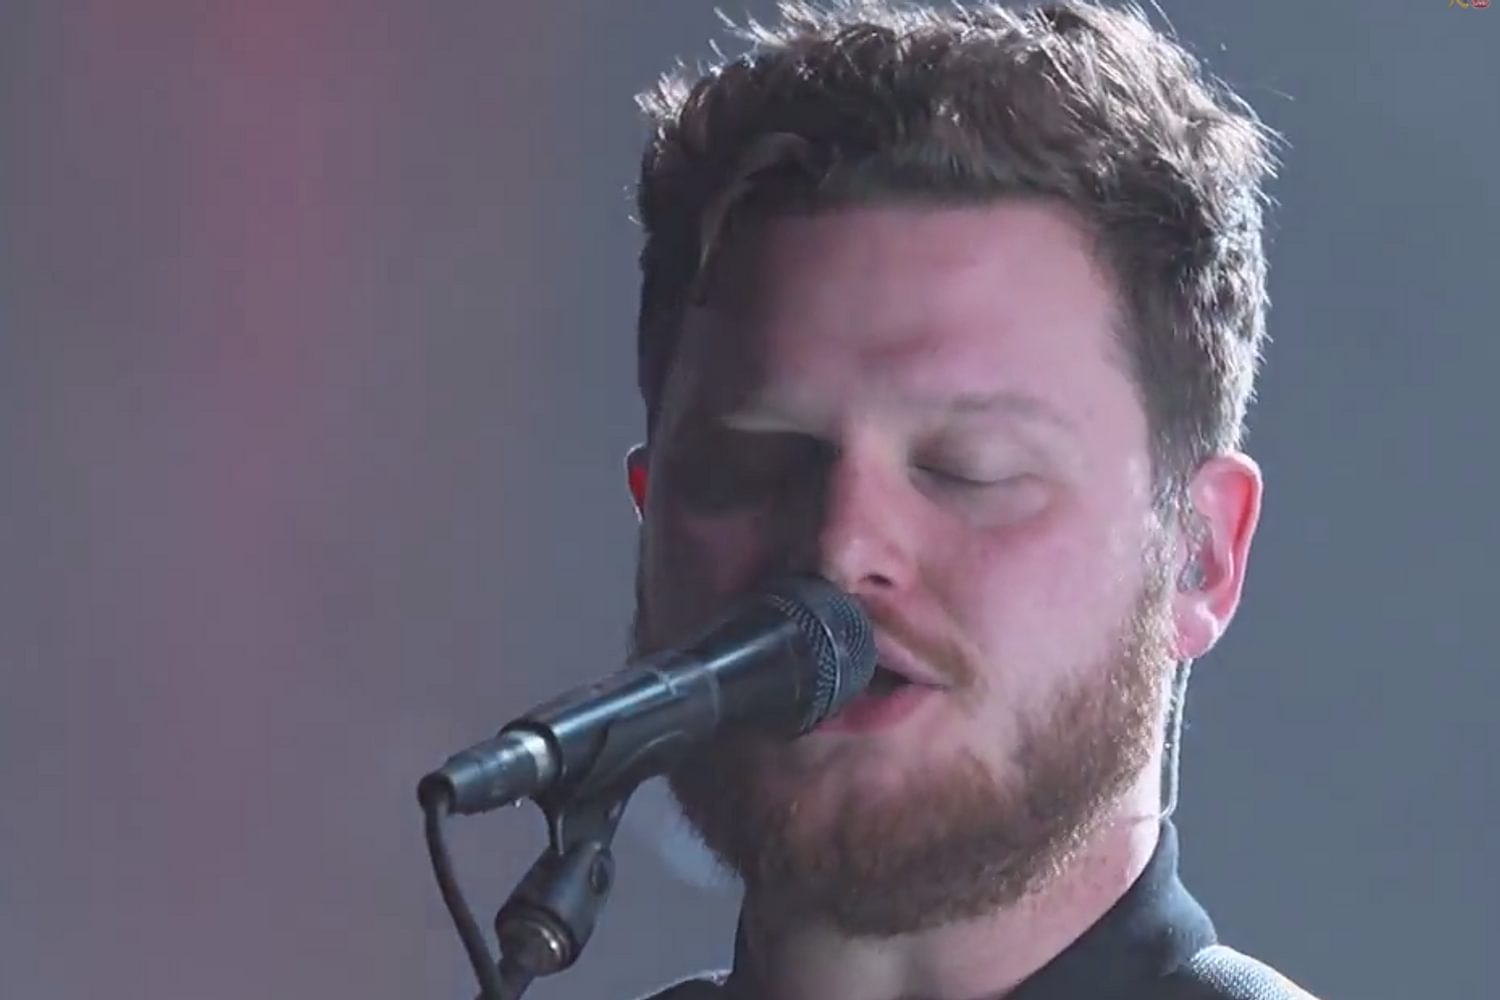 Watch Alt-J bring ‘Every Other Freckle’ and ‘Left Hand Free’ to Kimmel